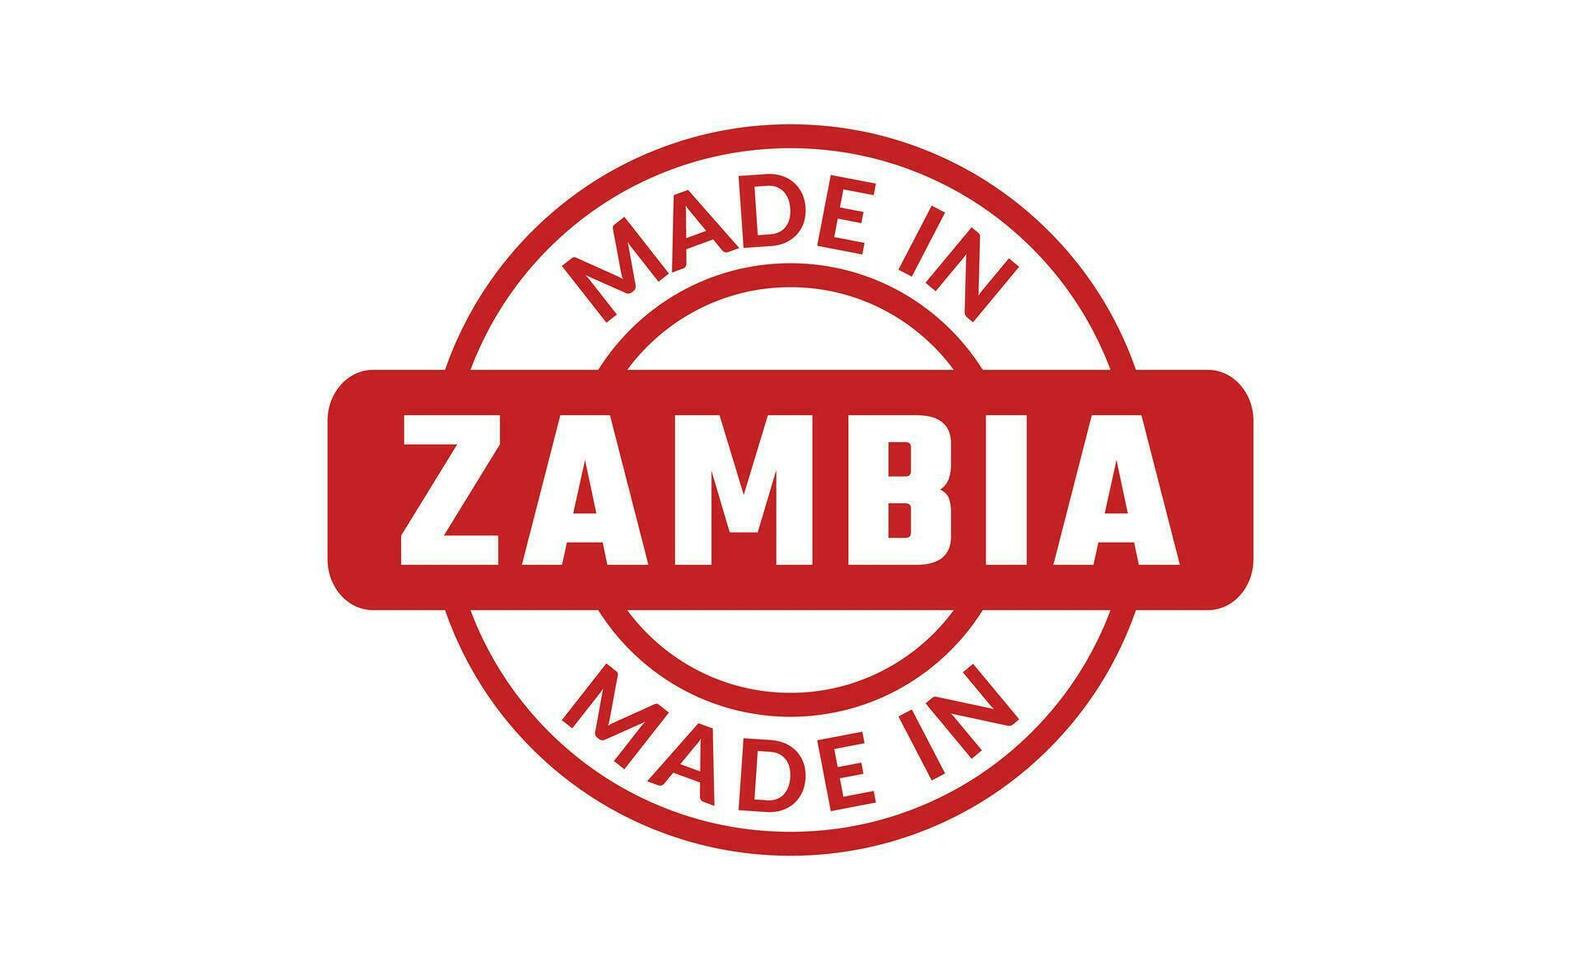 Made In Zambia Rubber Stamp vector